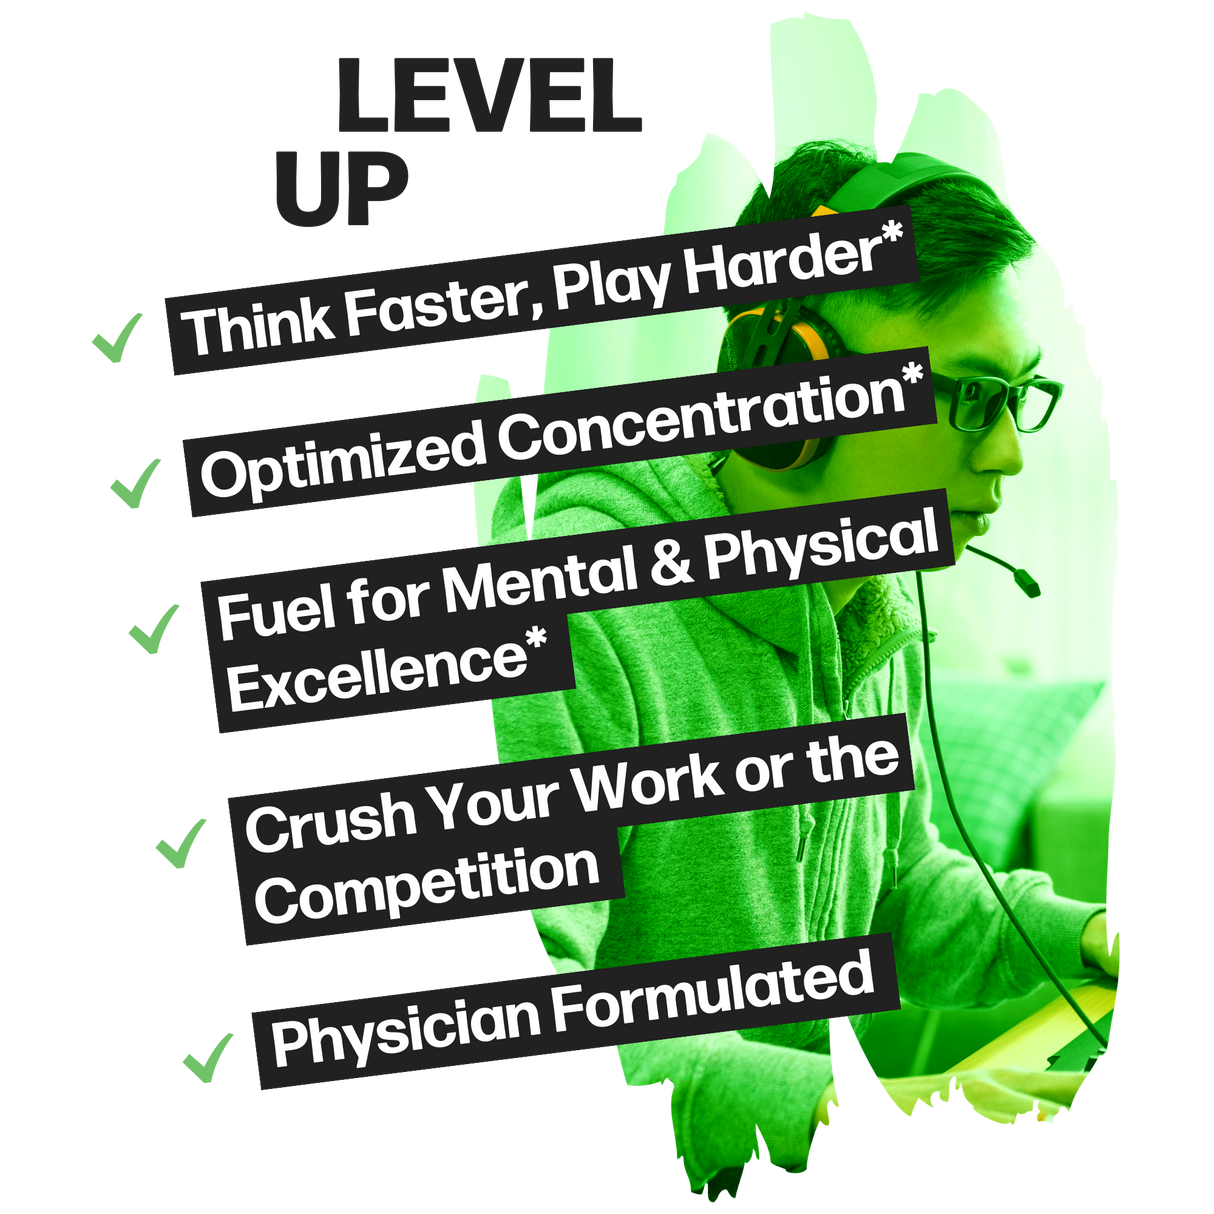 Life Happns Level Up Energy and Focus Supplement Benefits Listed as Think Faster, Play Harder, Optimized Concentration, Fuel for Mental and Physical Excellence, Crush Your Work or the Competition, and Physician Formulated